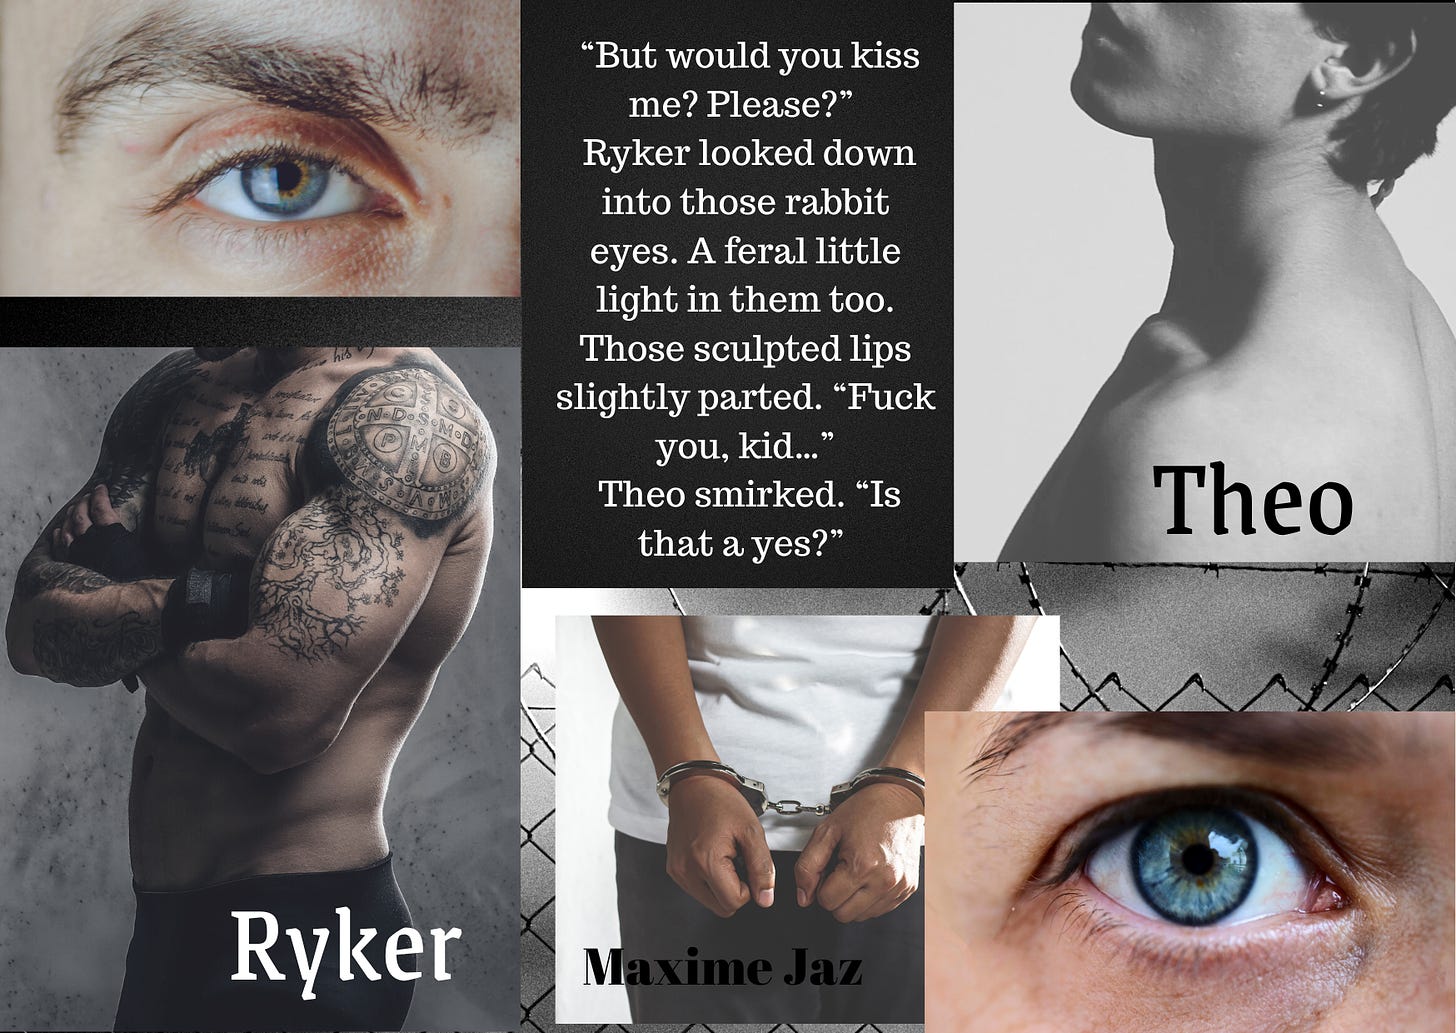 Prison fence background with cloudy sky, all greyed over. Right top a man's grey eye, right bottom pic a tattooed, muscled man, his arms crossed, face invisible. Caption Ryker. Top  left a young man's shoulders from the back, his face cut off at the nose, black hair. Bottom left a man's wide blue eye. Middle bottom a man's hand in cuffs. Written Maxime Jaz Quote top middle:  "But would you kiss me? Please?" Ryker looked down into those rabbit eyes. A feral little light in them too. Those sculpted lips slightly parted. "Fuck you, kid..." Theo smirked. "Is that a yes?"